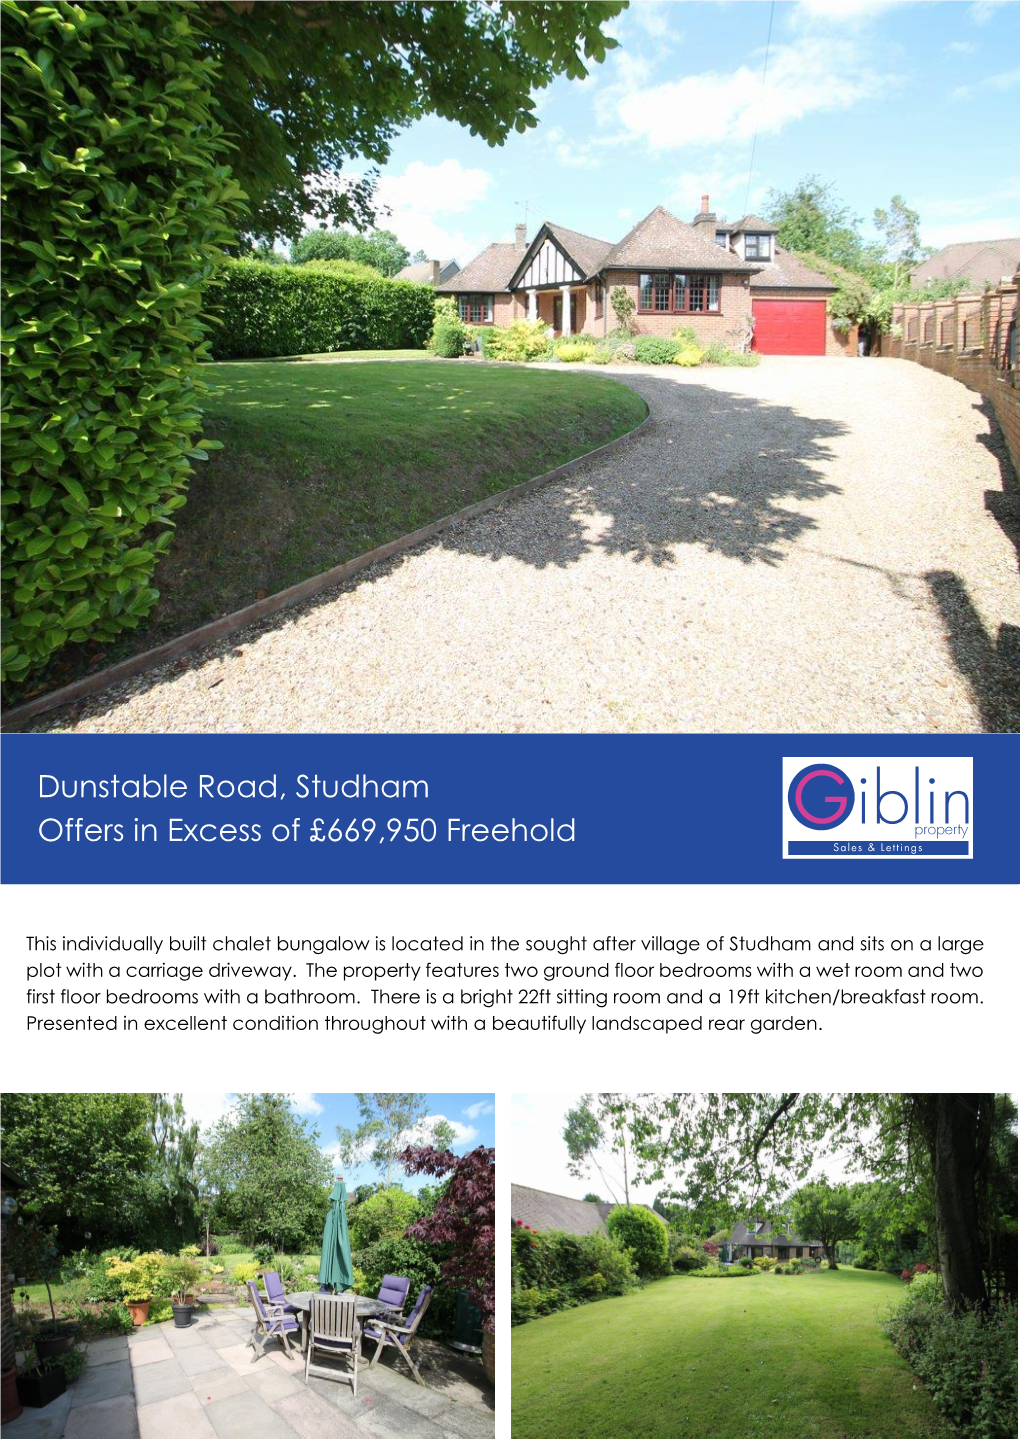 Dunstable Road, Studham Offers in Excess of £669,950 Freehold